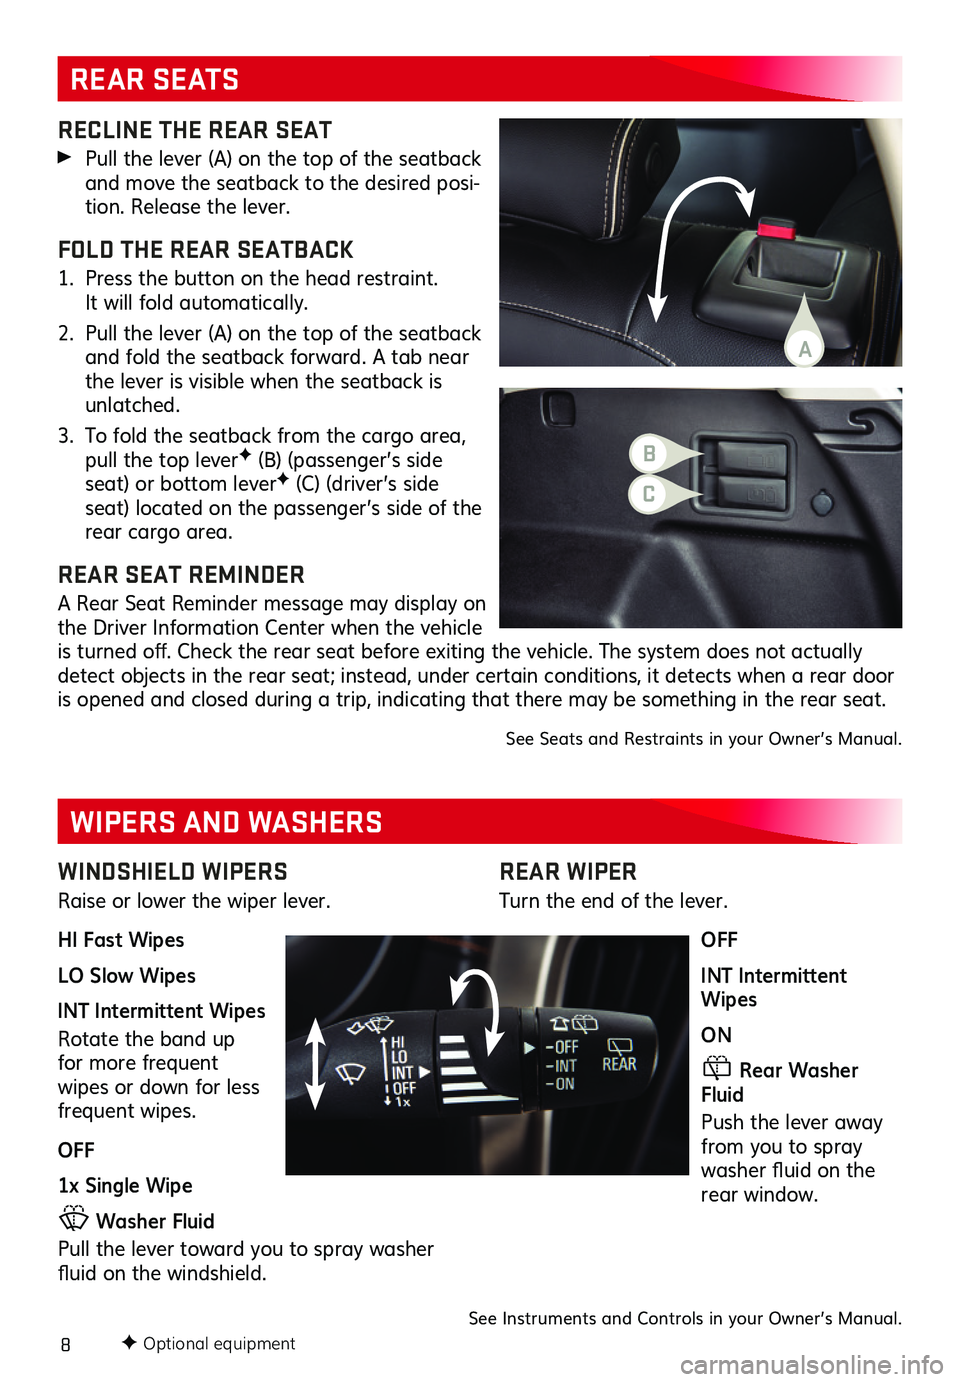 GMC TERRAIN 2019  Get To Know Guide 8
REAR WIPER
Turn the end of the lever .
OFF
INT Intermittent Wipes
ON
 Rear Washer Fluid
Push the lever away from you to spray washer fluid on the rear window .
RECLINE THE REAR SEAT
 Pull the lever 